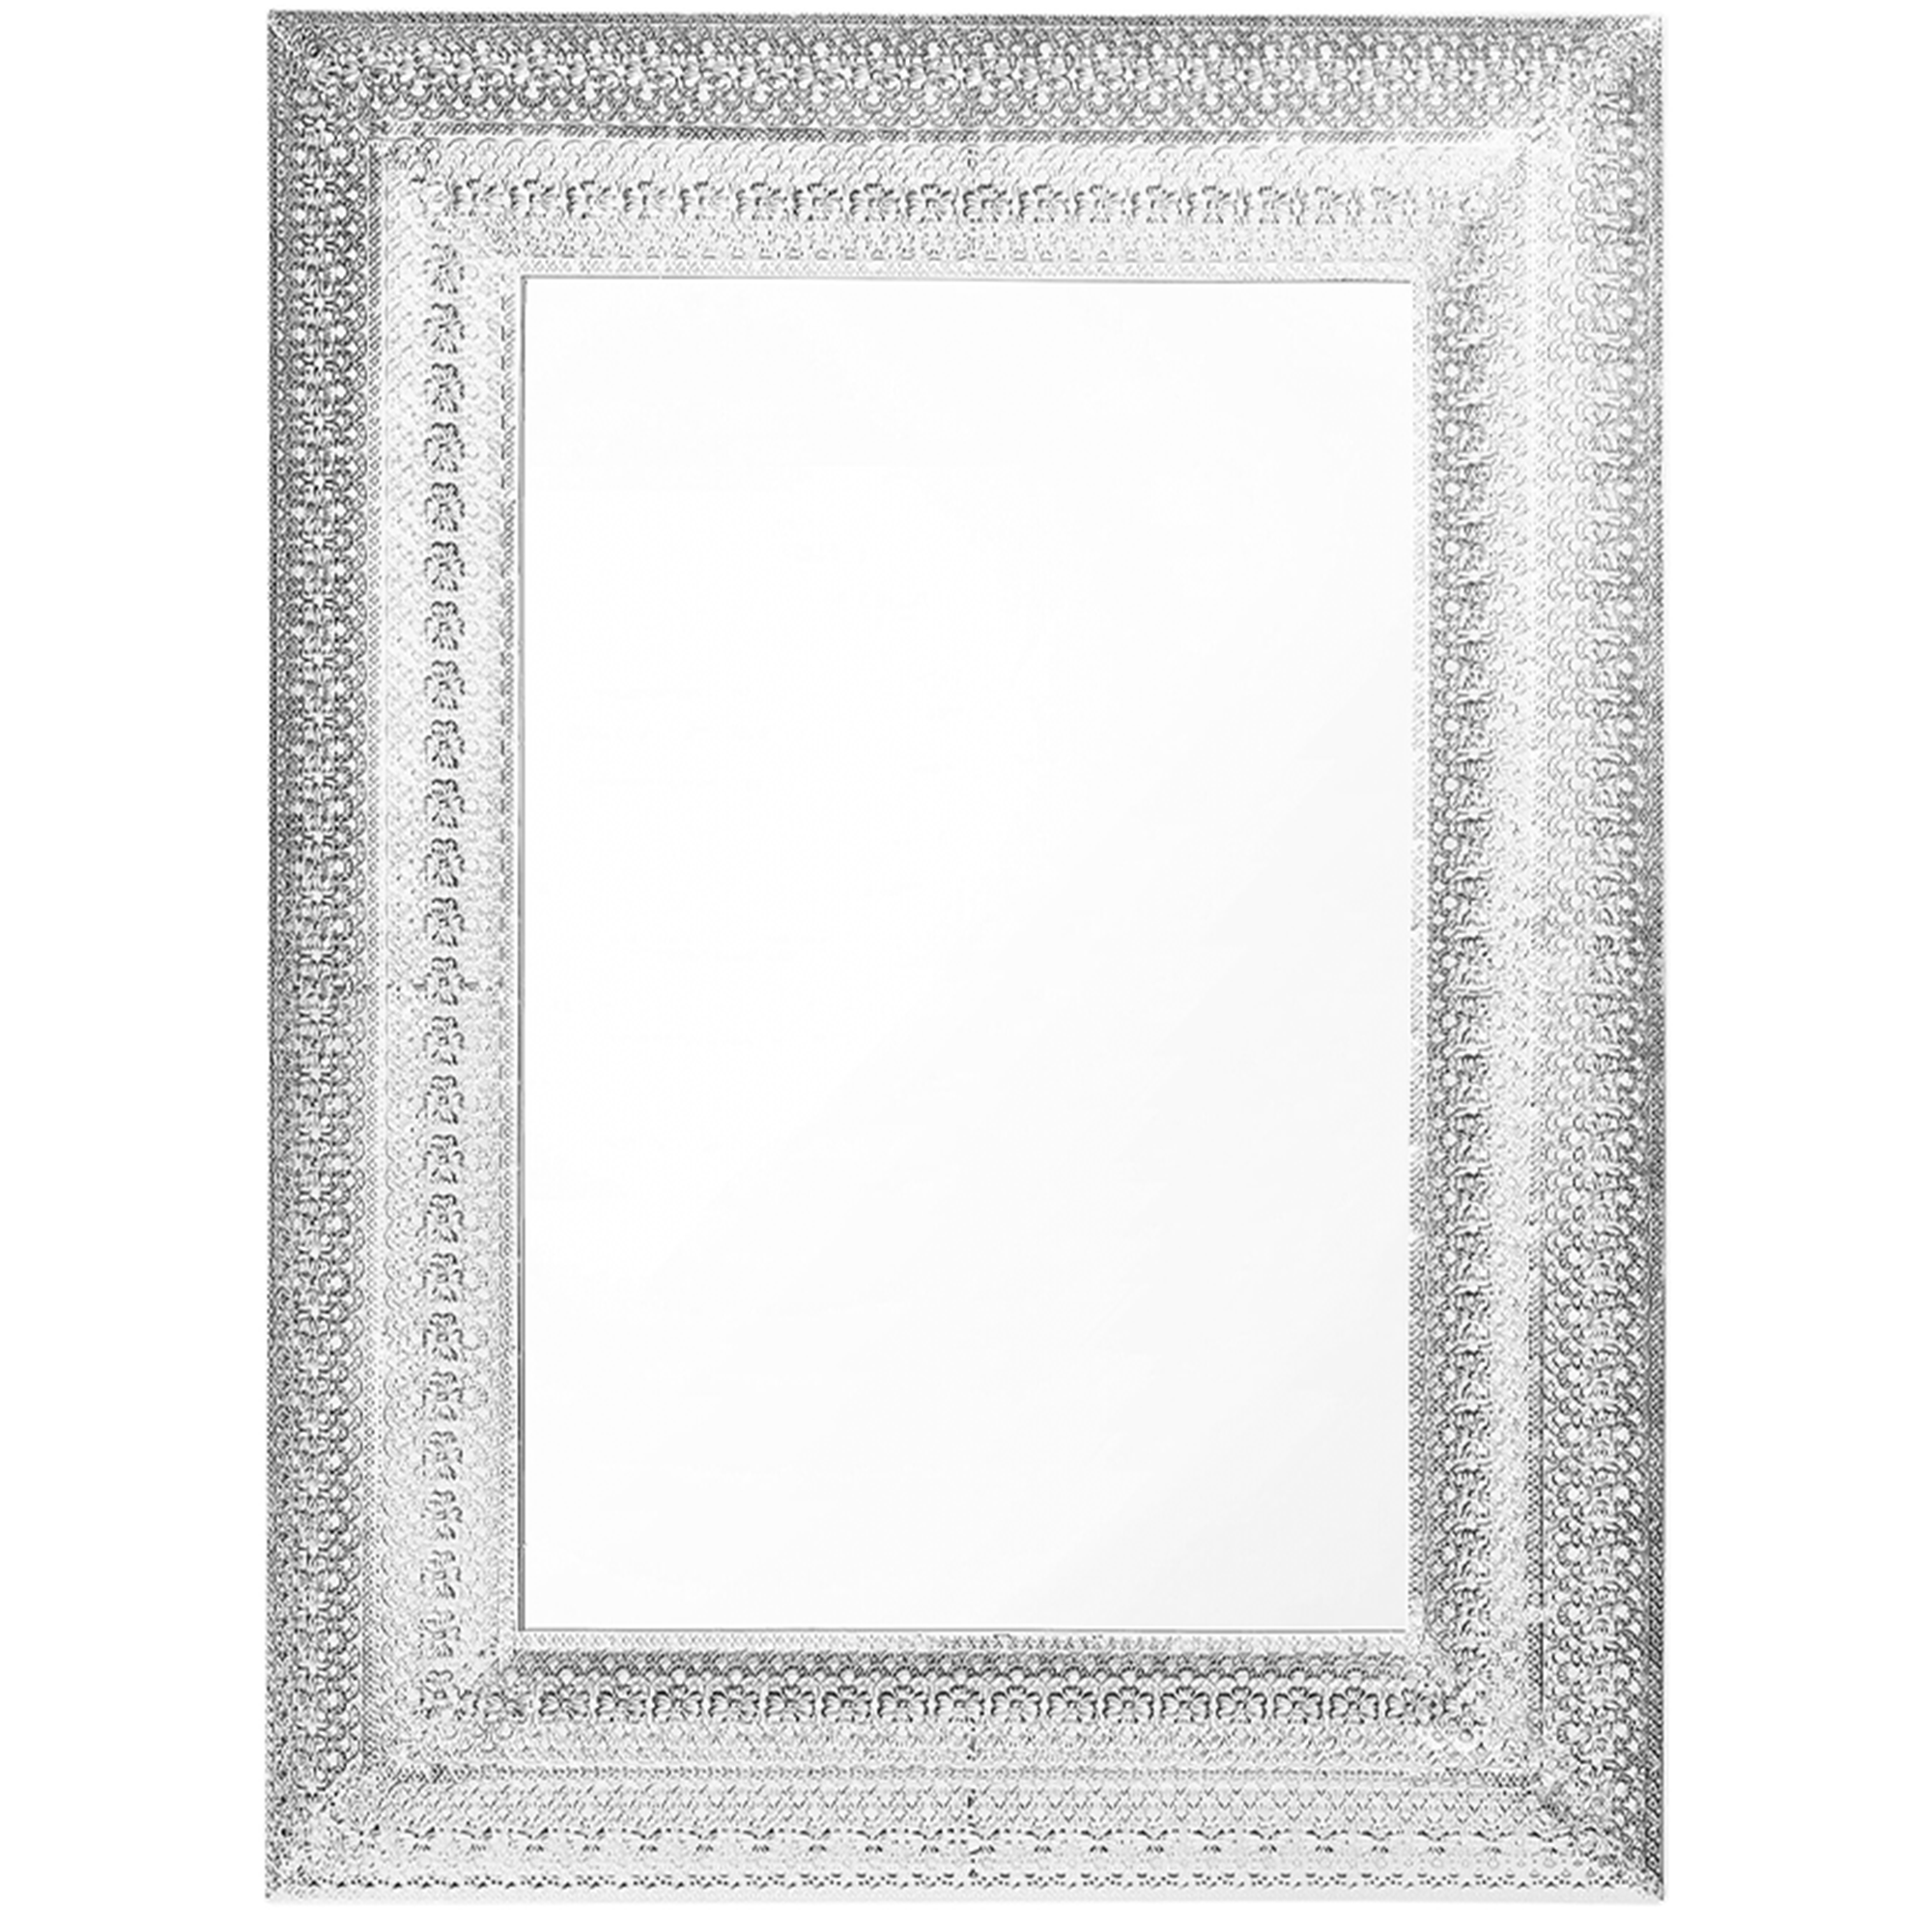 Beliani Wall Mounted Hanging Mirror Silver 70 x 90 cm Thick Decorative Frame